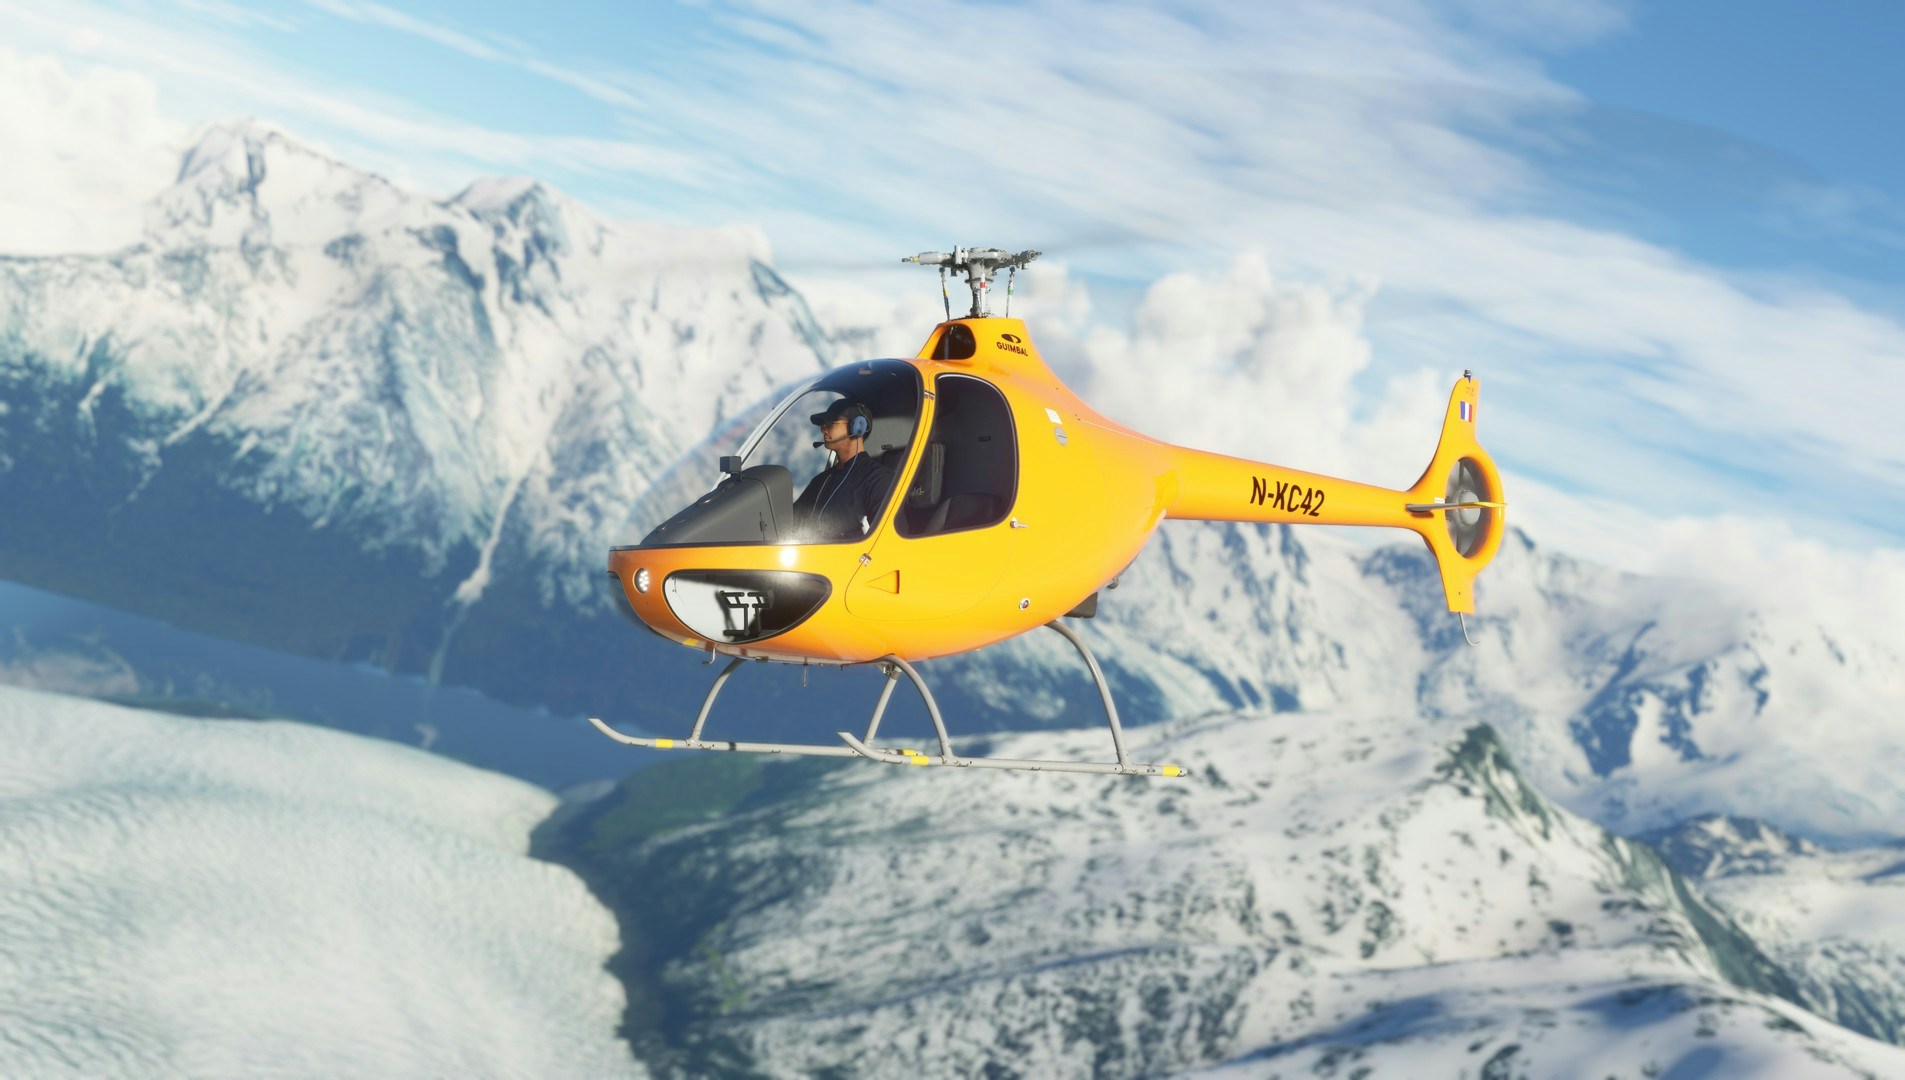 Upgrade your Cabri with the Parallel 42 Cabri G2 Color Pack